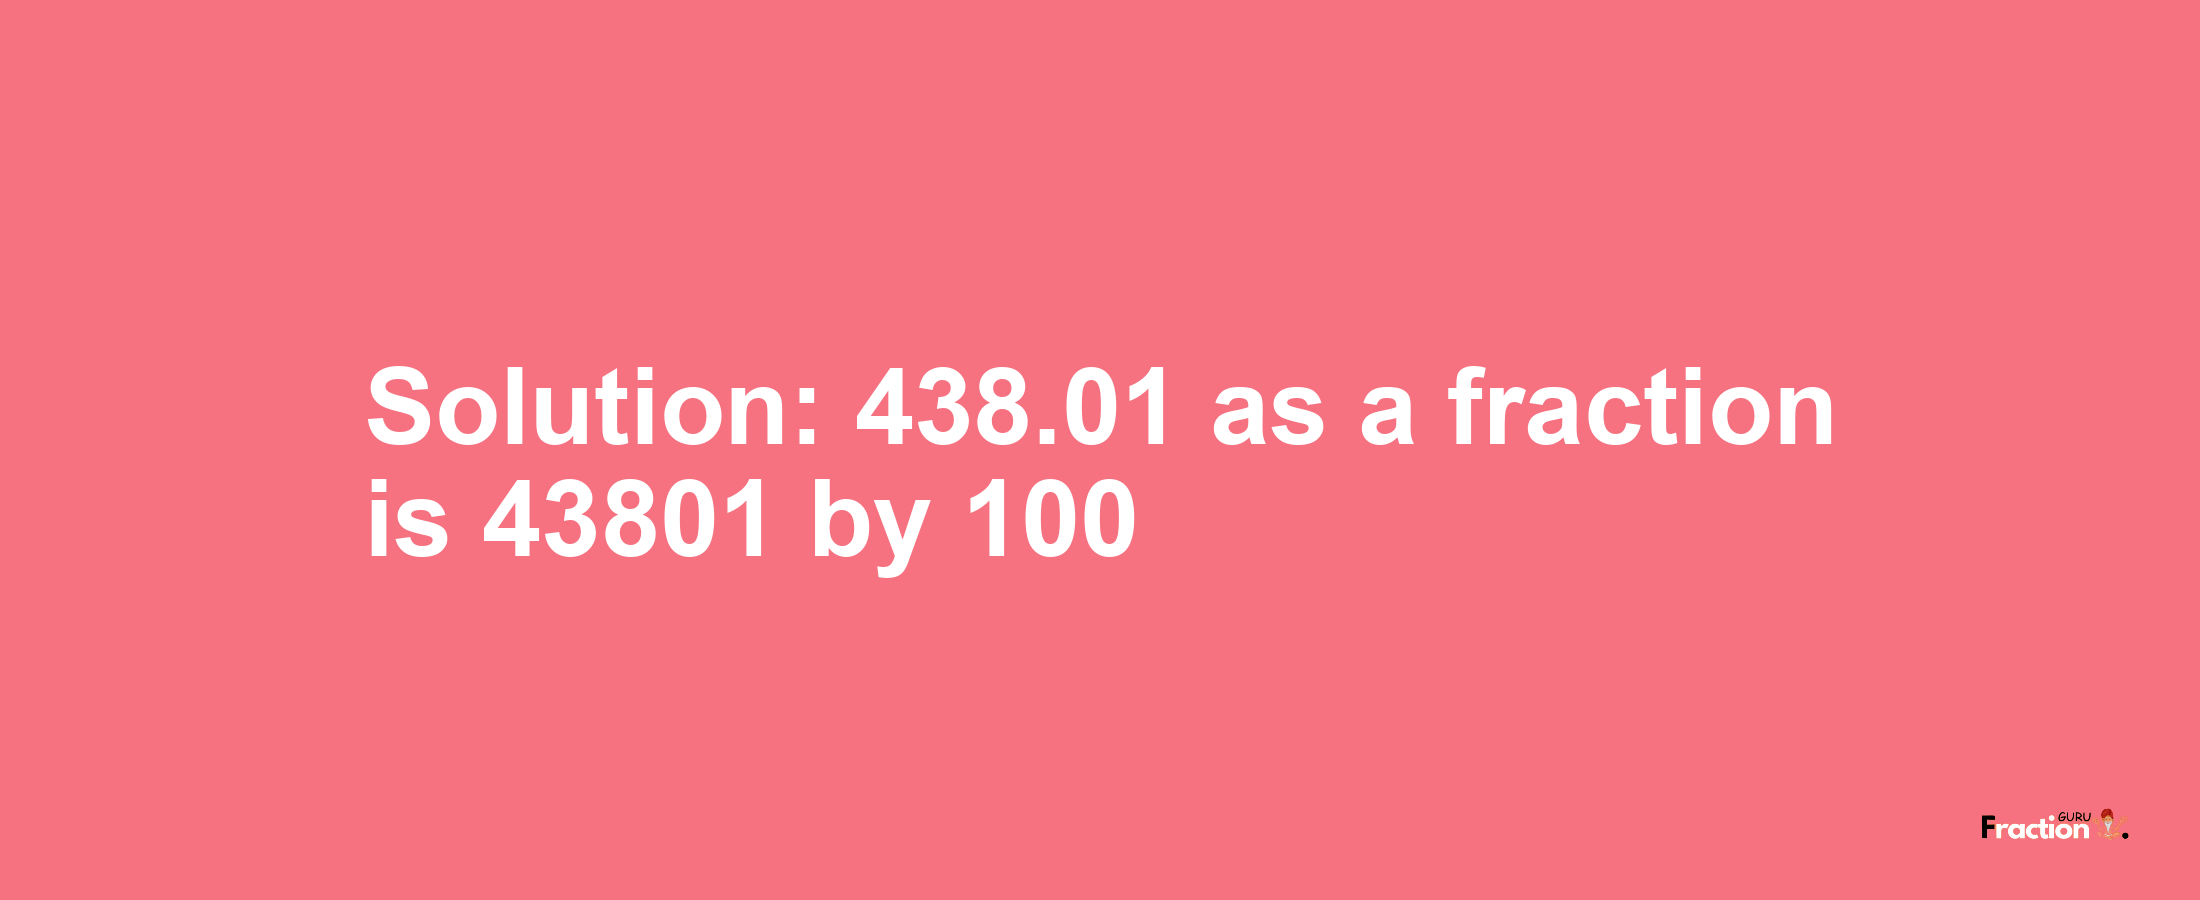 Solution:438.01 as a fraction is 43801/100